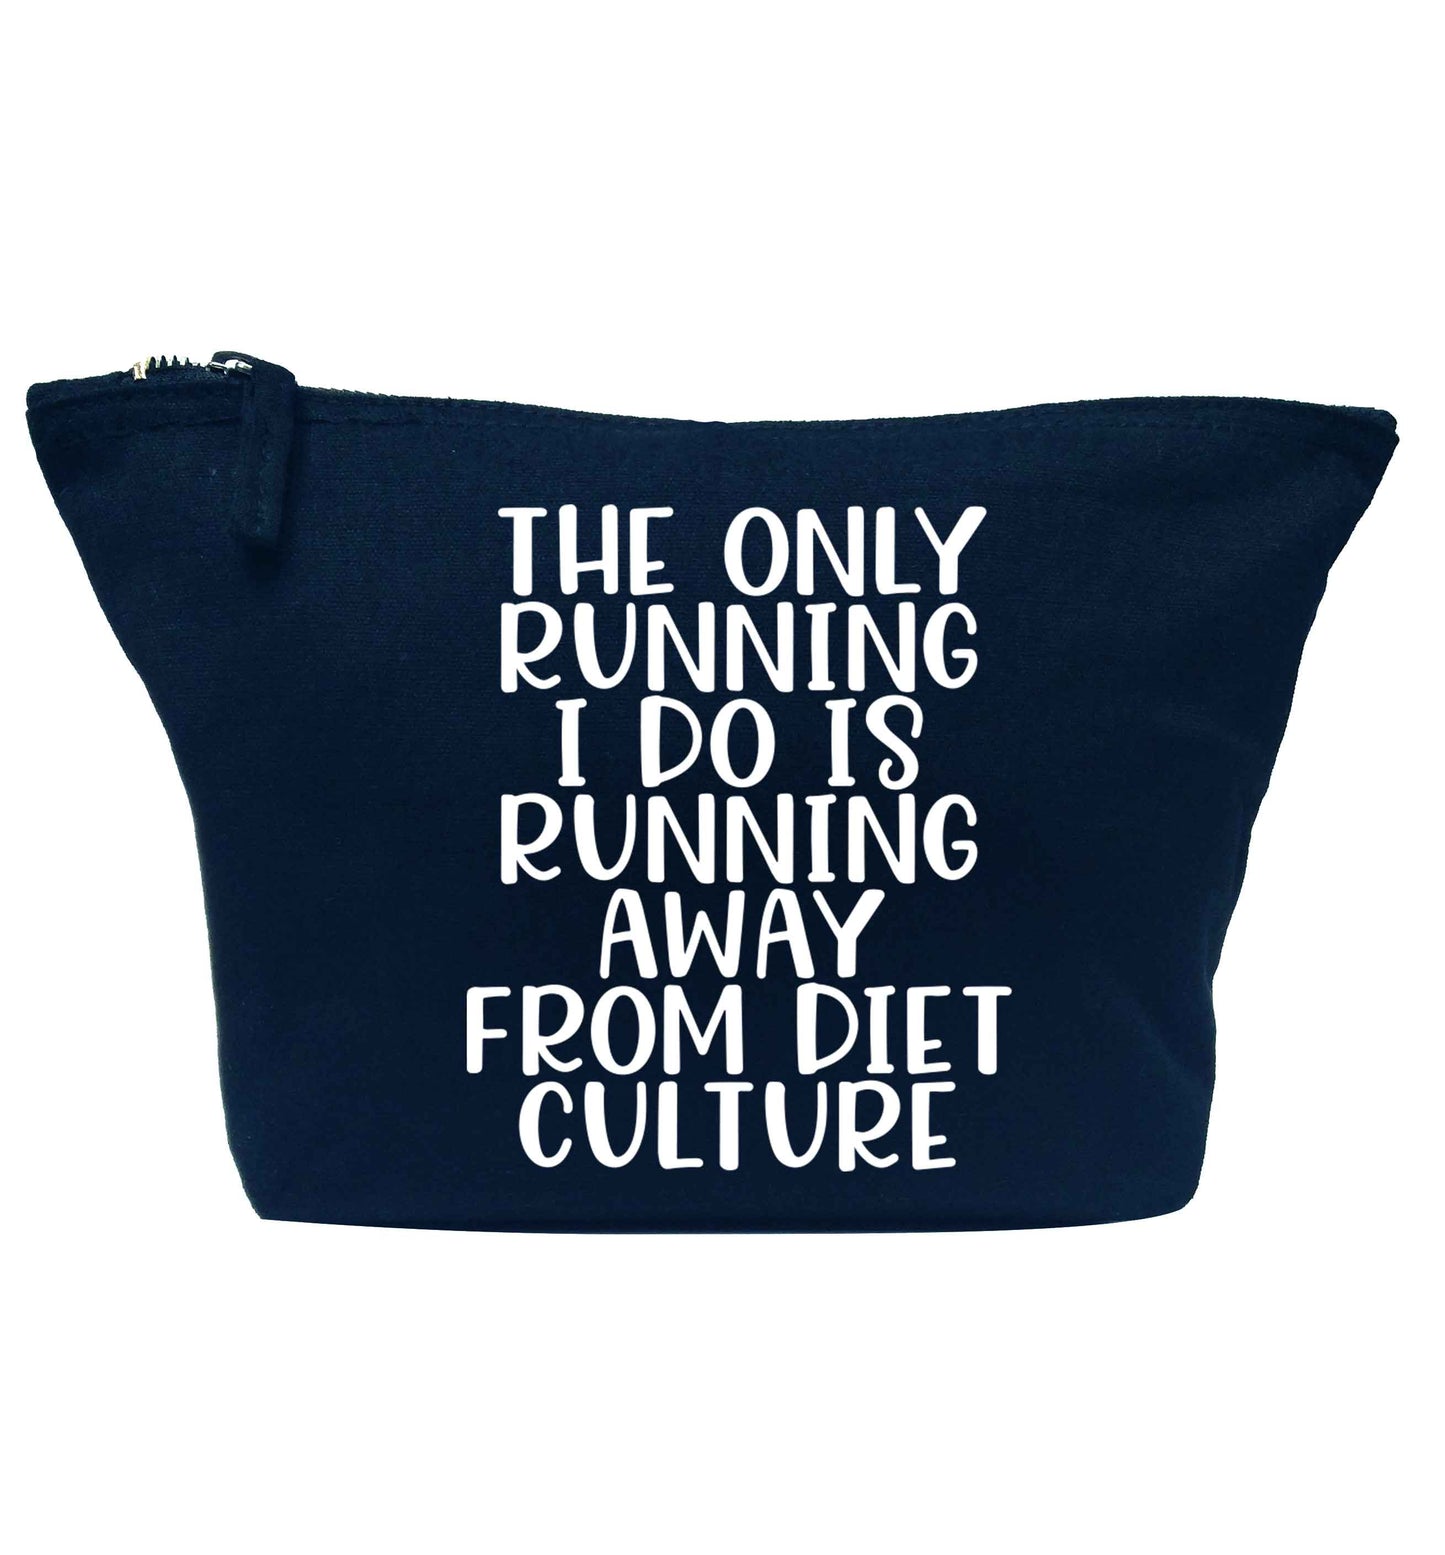 The only running I do is running away from diet culture navy makeup bag